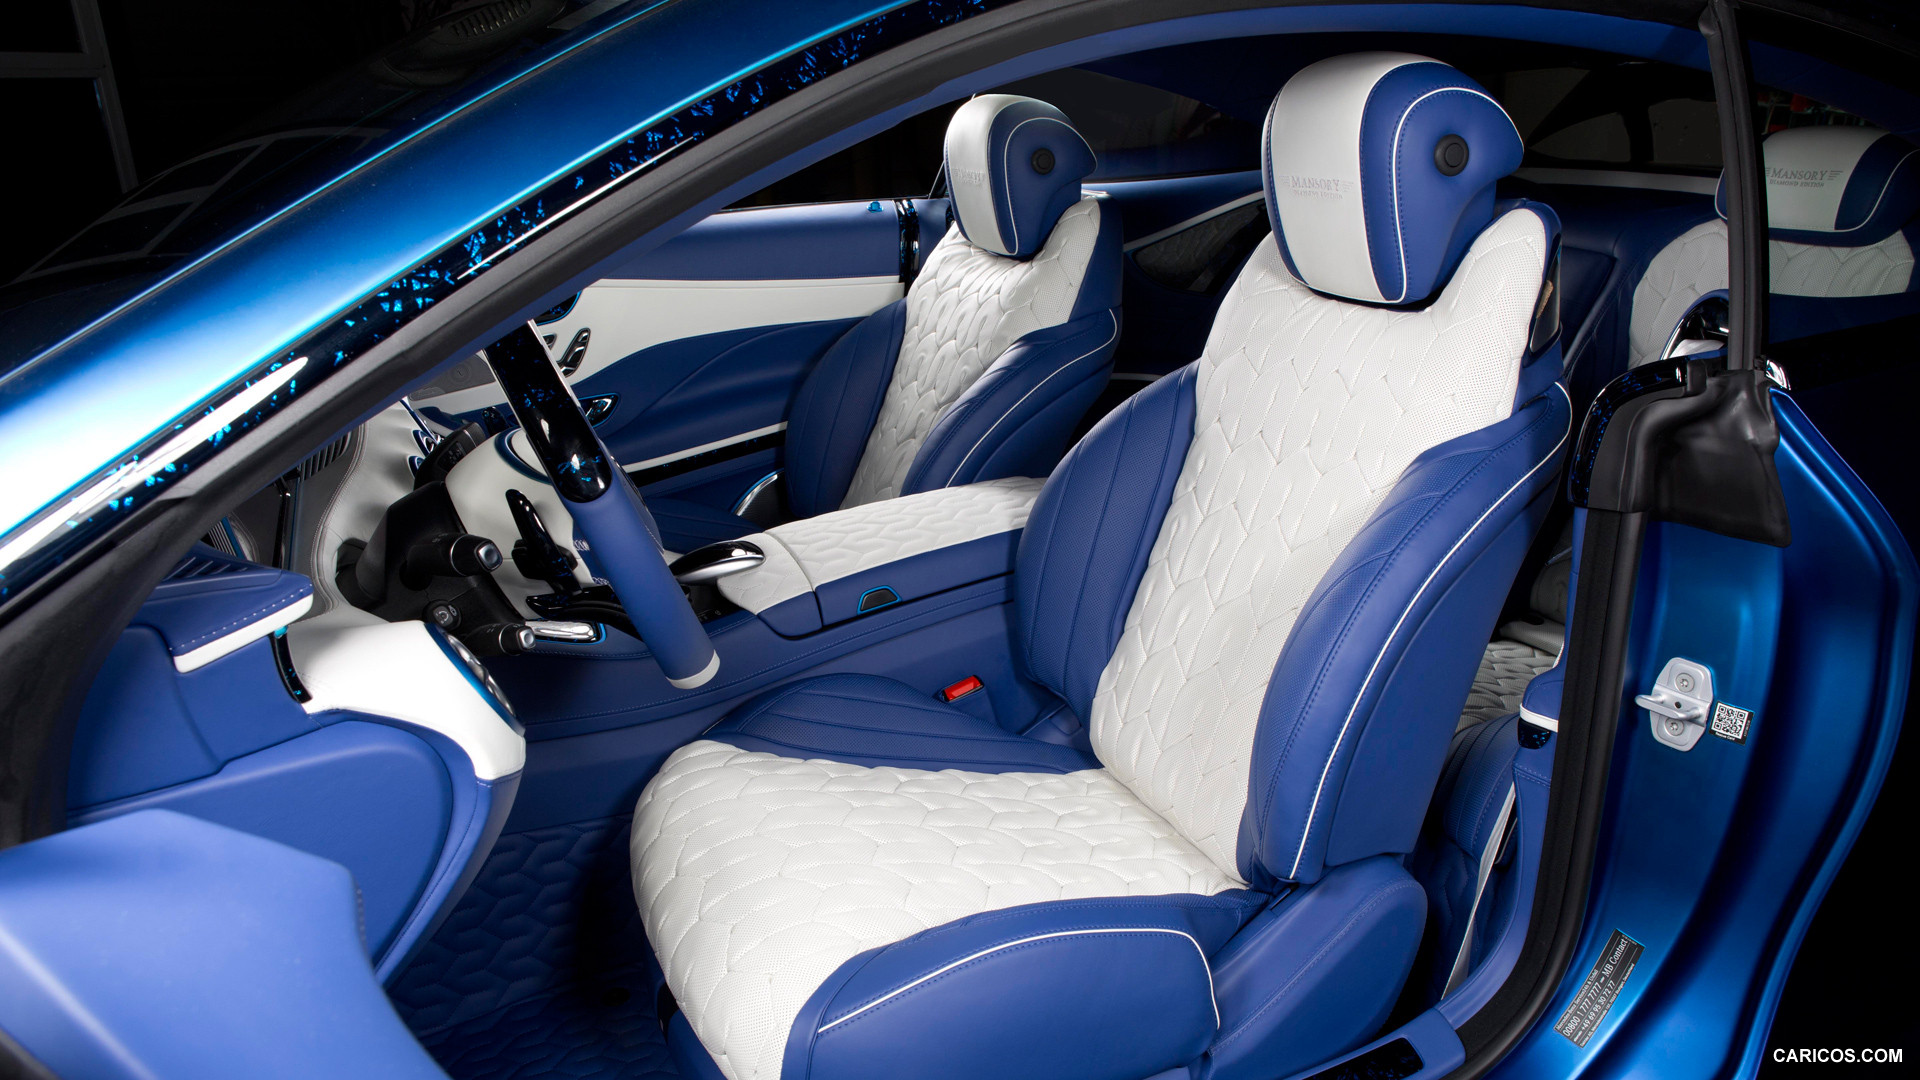 2015 Mansory Mercedes-Benz S63 AMG Coupe Diamond Edition  - Interior Front Seats, #4 of 7